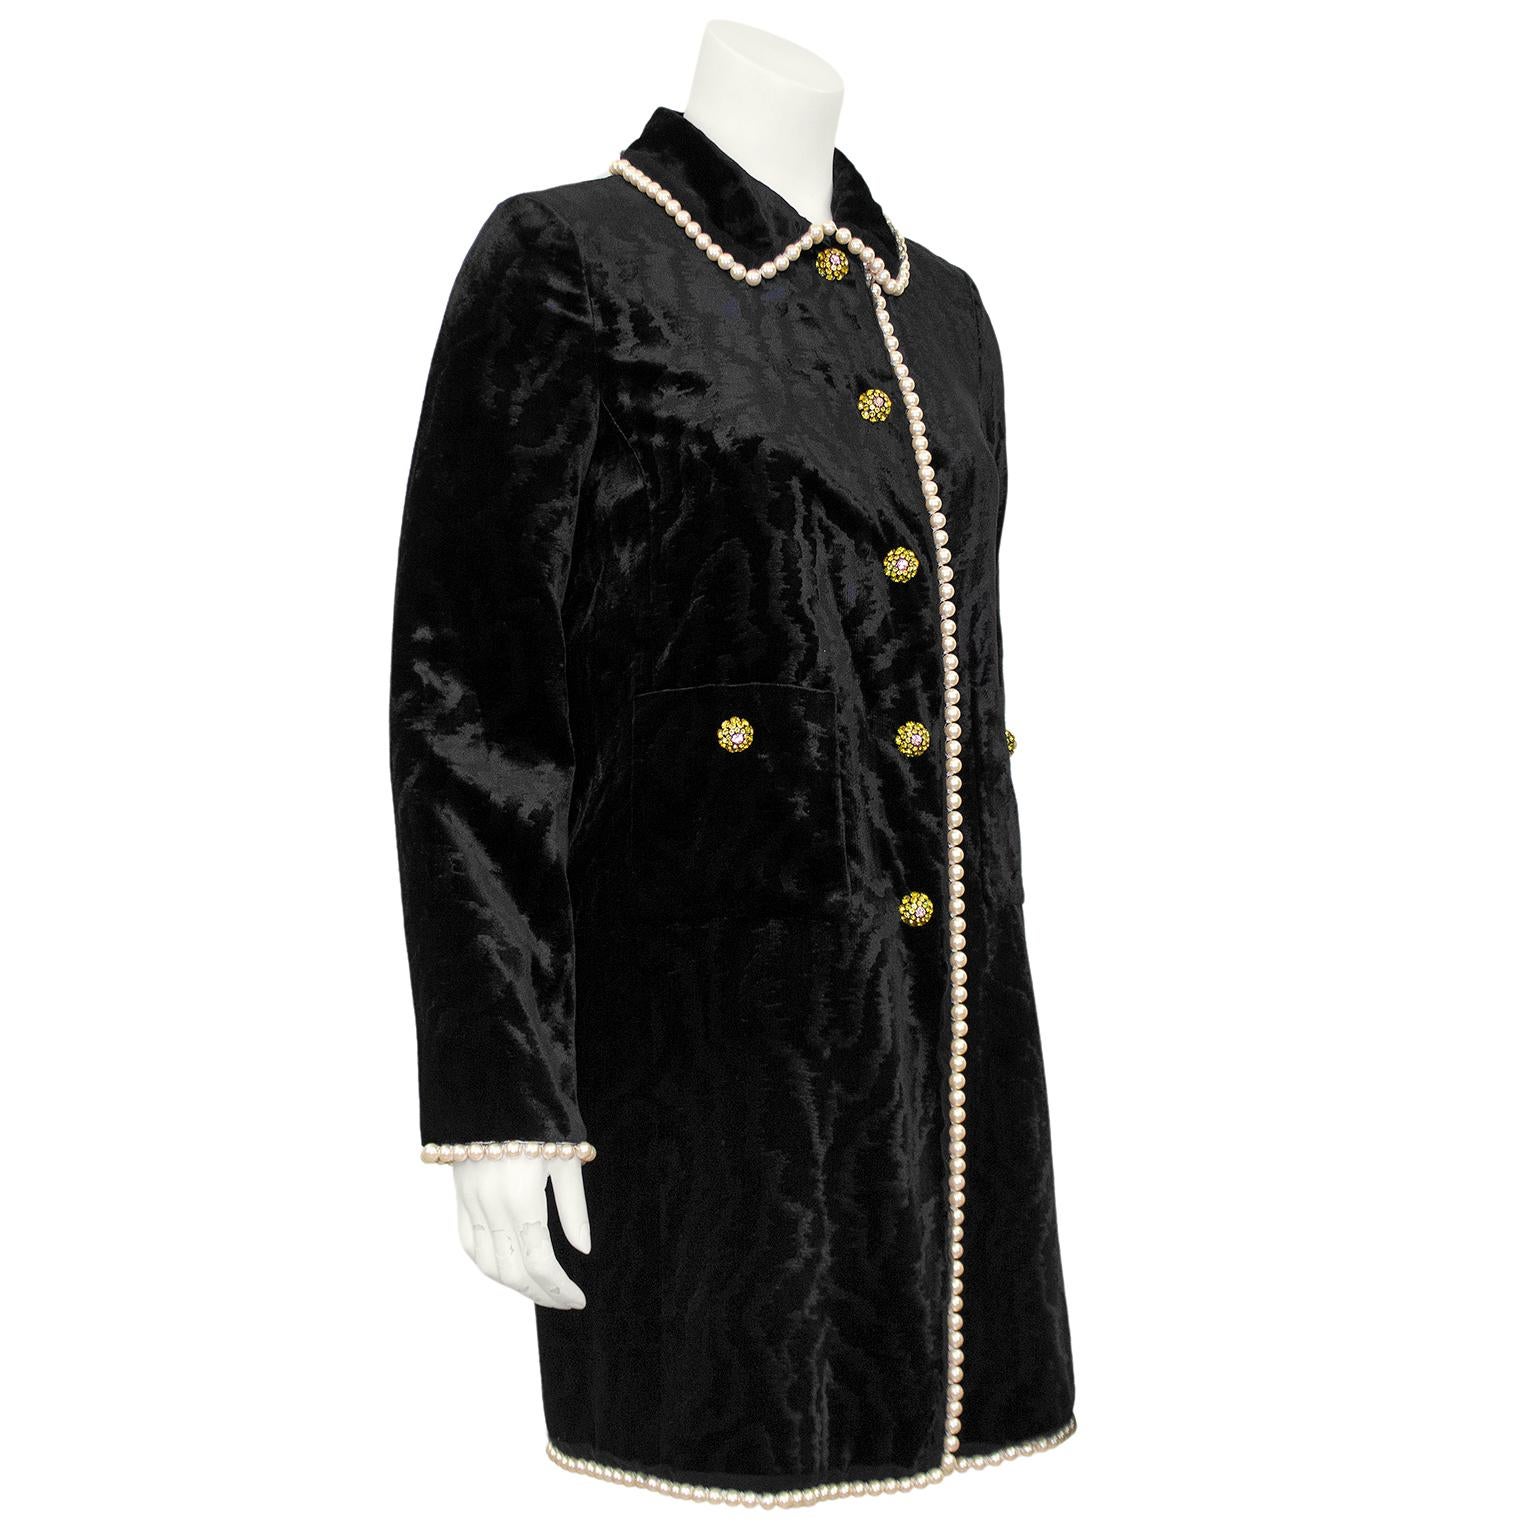 From 2018 and by the incomparable Alessandro Michele, this is an incredible Gucci jacket. Black woven moire velvet with black tulle and large faux pearl trim. Embellished with yellow and pink Swarovski crystal dome shaped buttons. Cream silk lining.